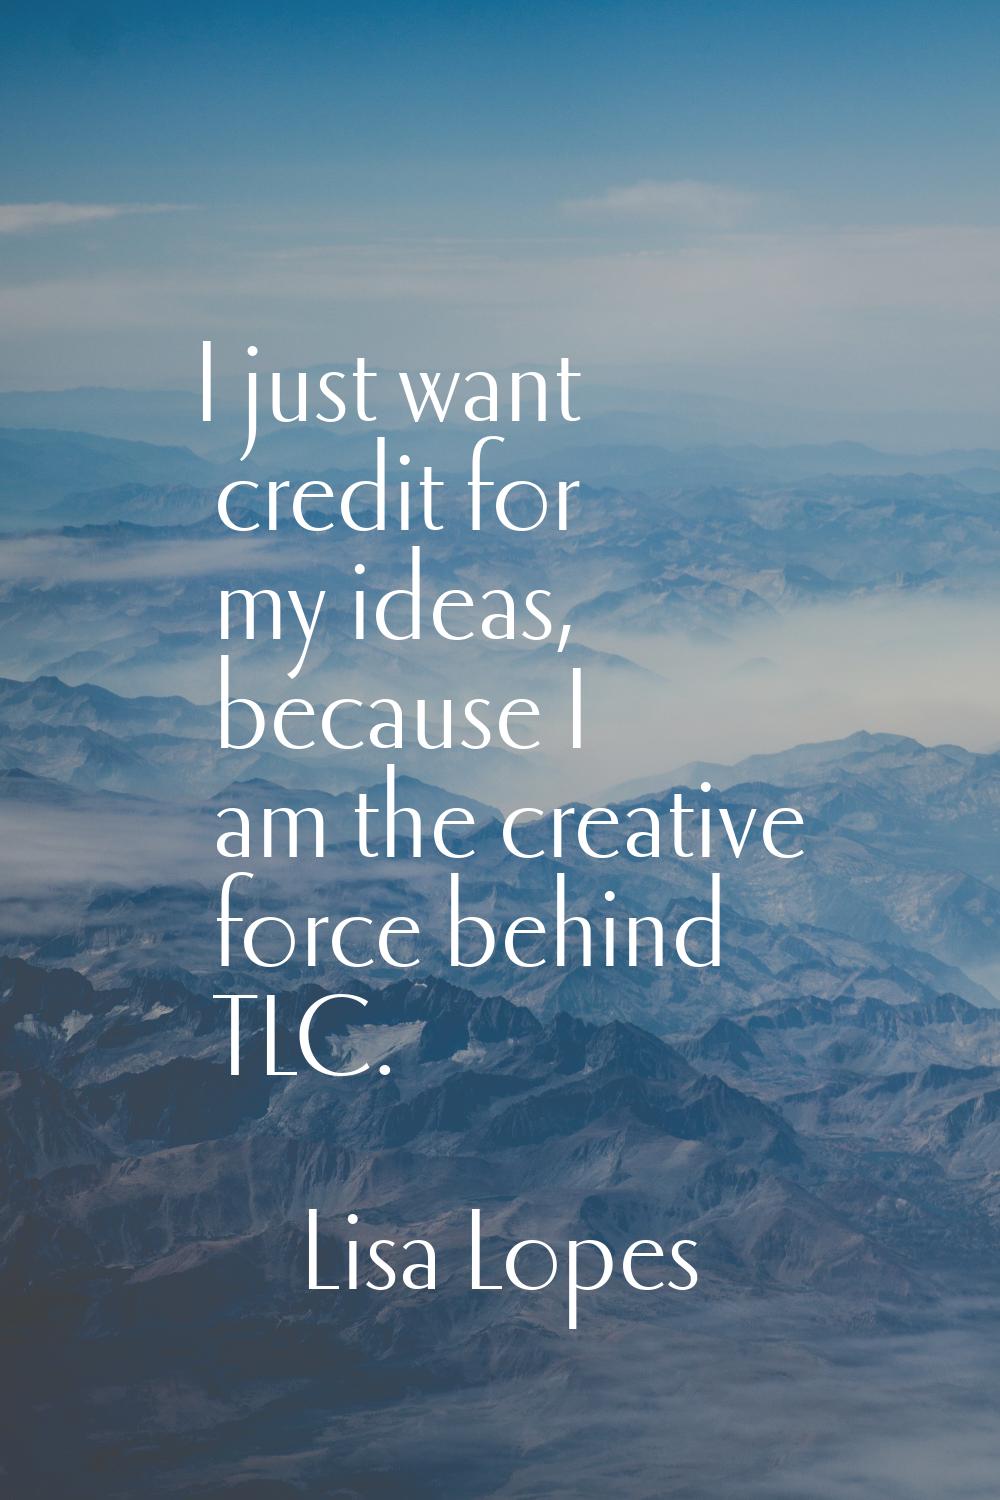 I just want credit for my ideas, because I am the creative force behind TLC.